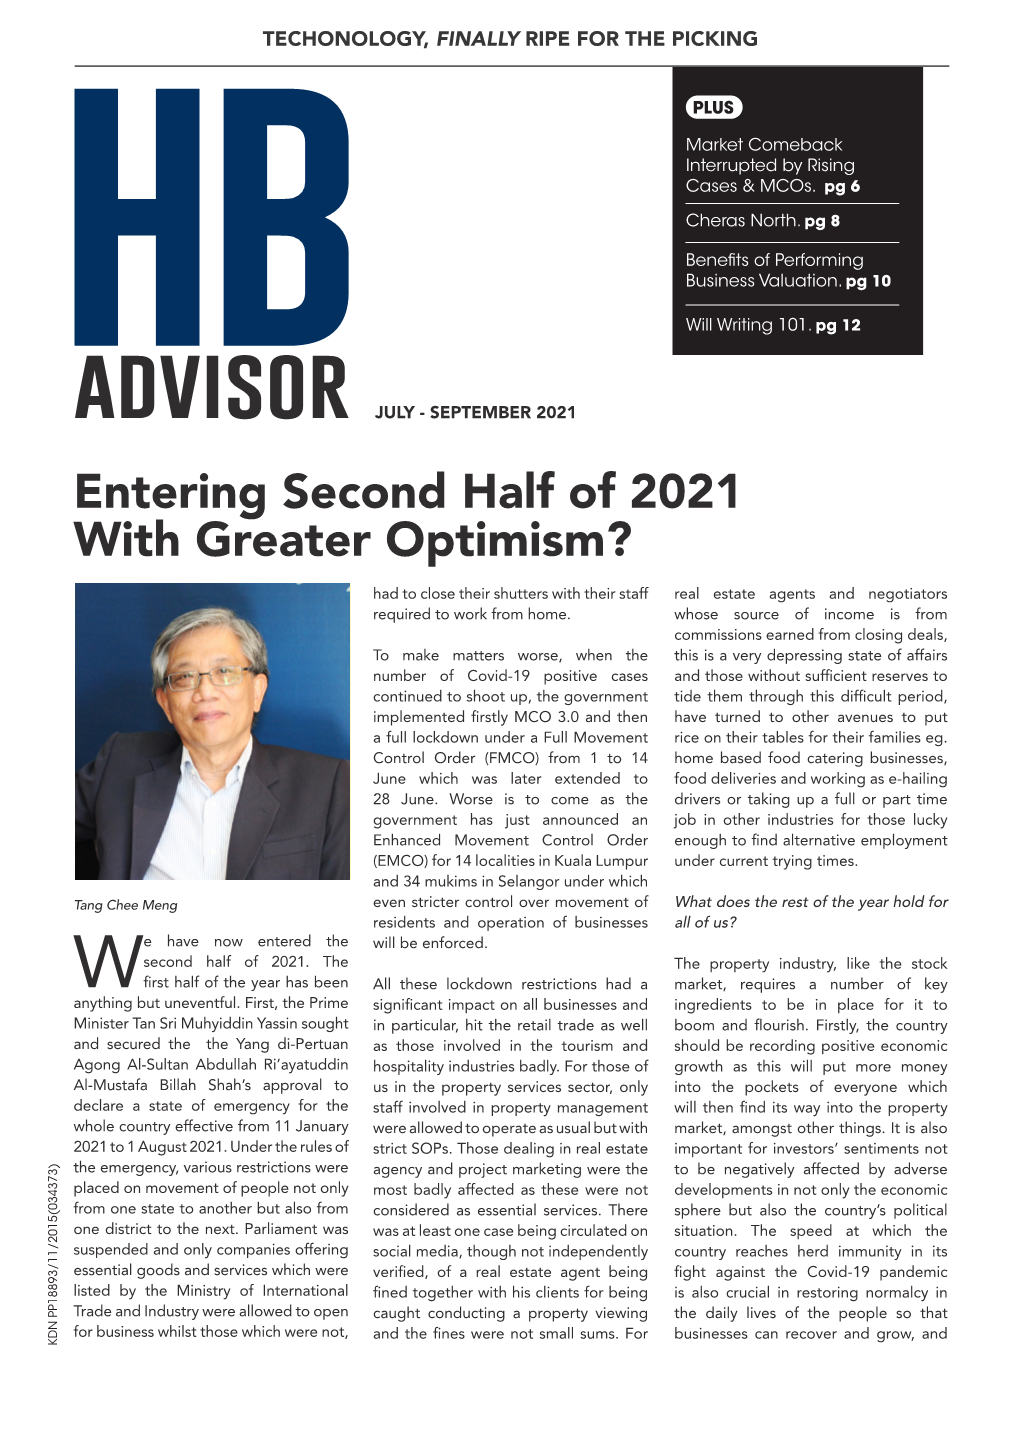 Entering Second Half of 2021 with Greater Optimism?